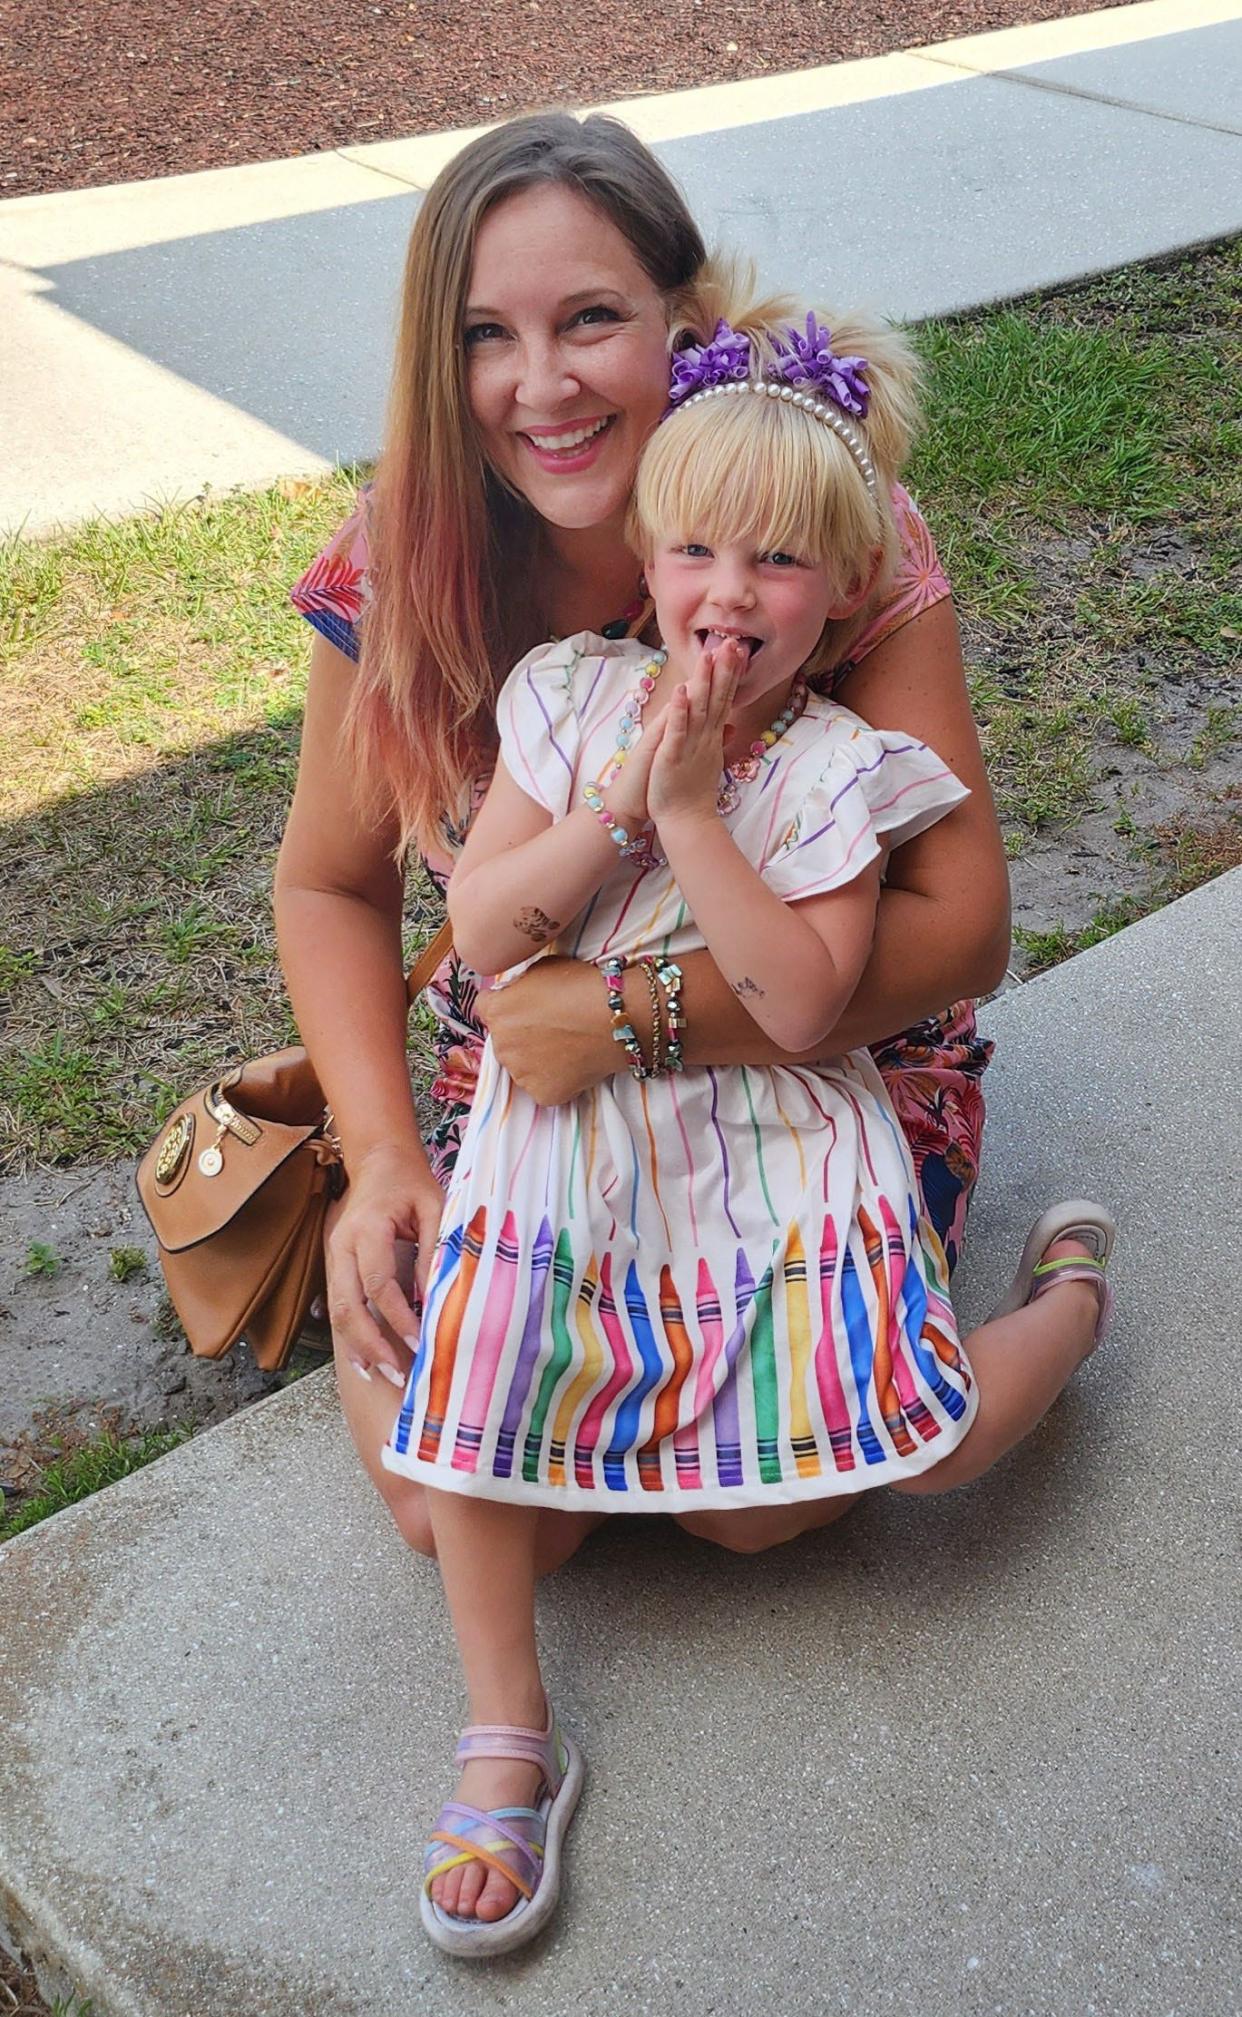 Dana Landin, 47, and her 4-year-old daughter, Zoey.